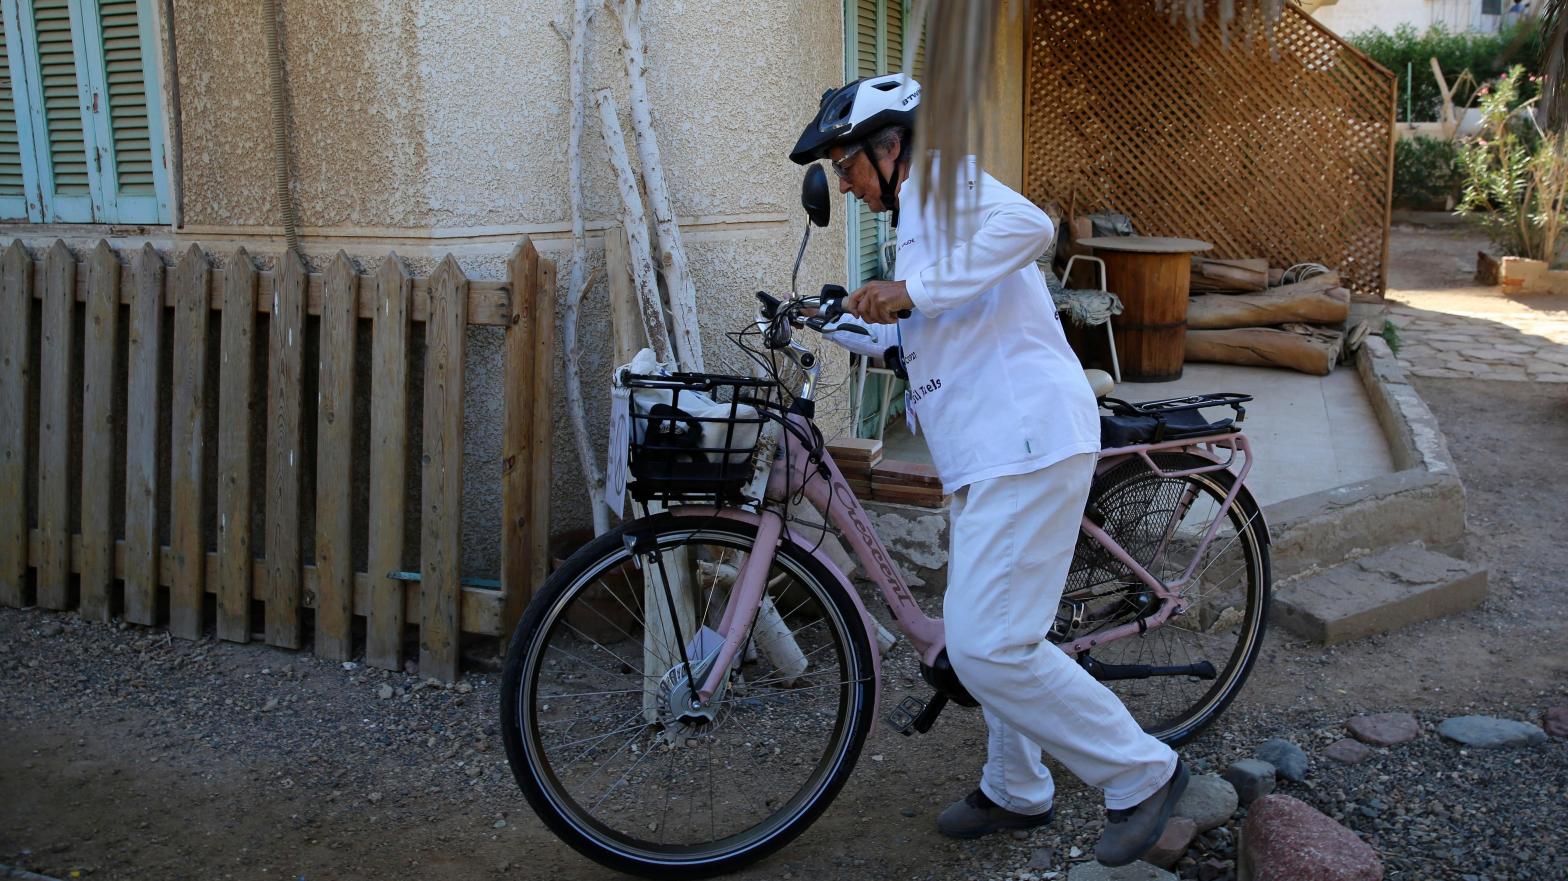 Dorothee Hildebrandt, 72, sets out from her host's apartment to ride her bike to the U.N. climate summit COP27 in Sharm el-Sheikh, Egypt, Saturday, Nov. 12, 2022. (Photo: Thomas Hartwell, AP)